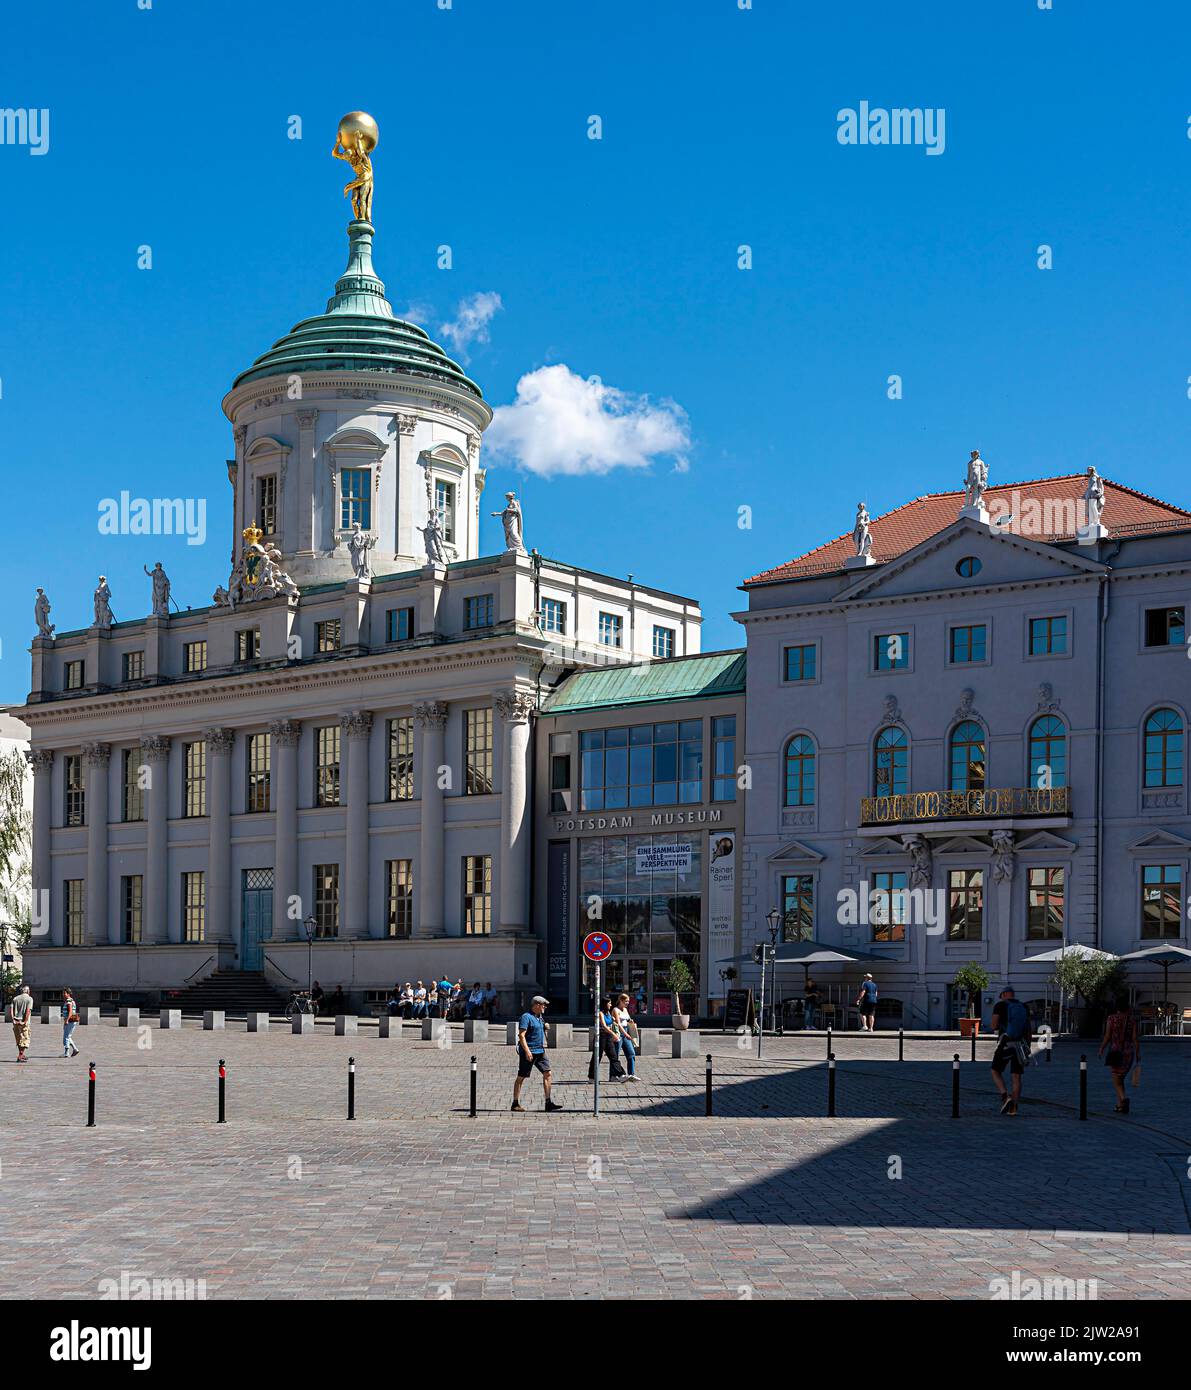 Old Town Hall and the Barbarini Museum on the Old Market Square, Potsdam, Brandenburg, Germany Stock Photo